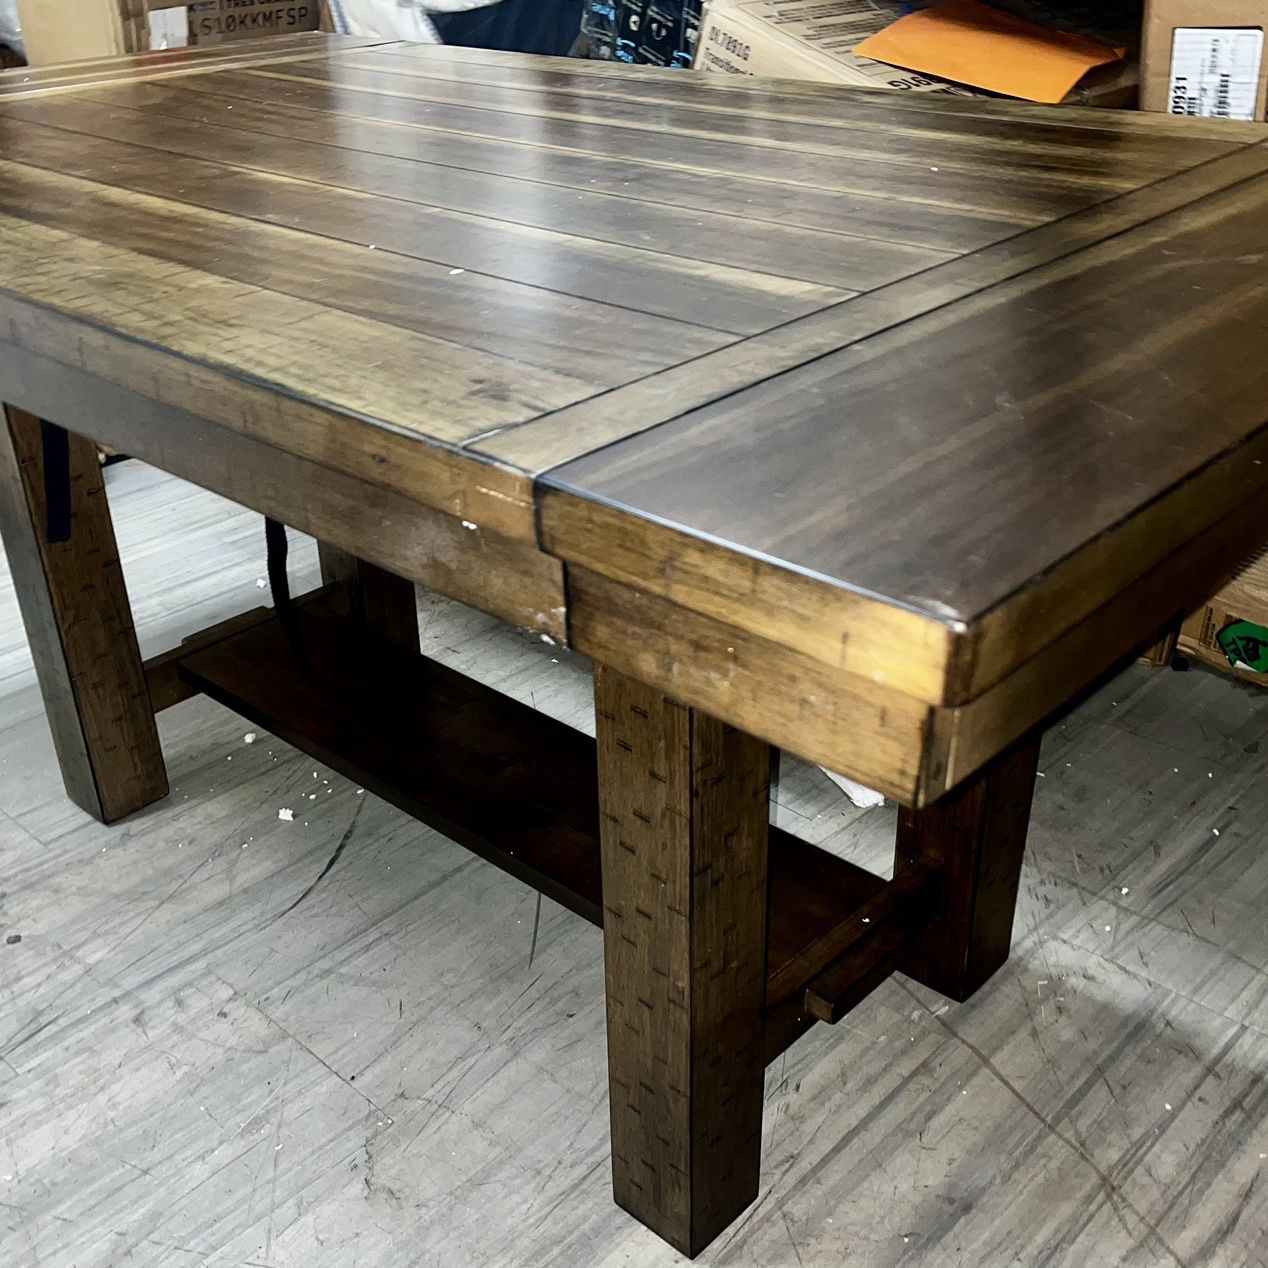 New Rustic Style Real Wood Dining Table By Ashley’s Design ✅ Financing Available Only $39